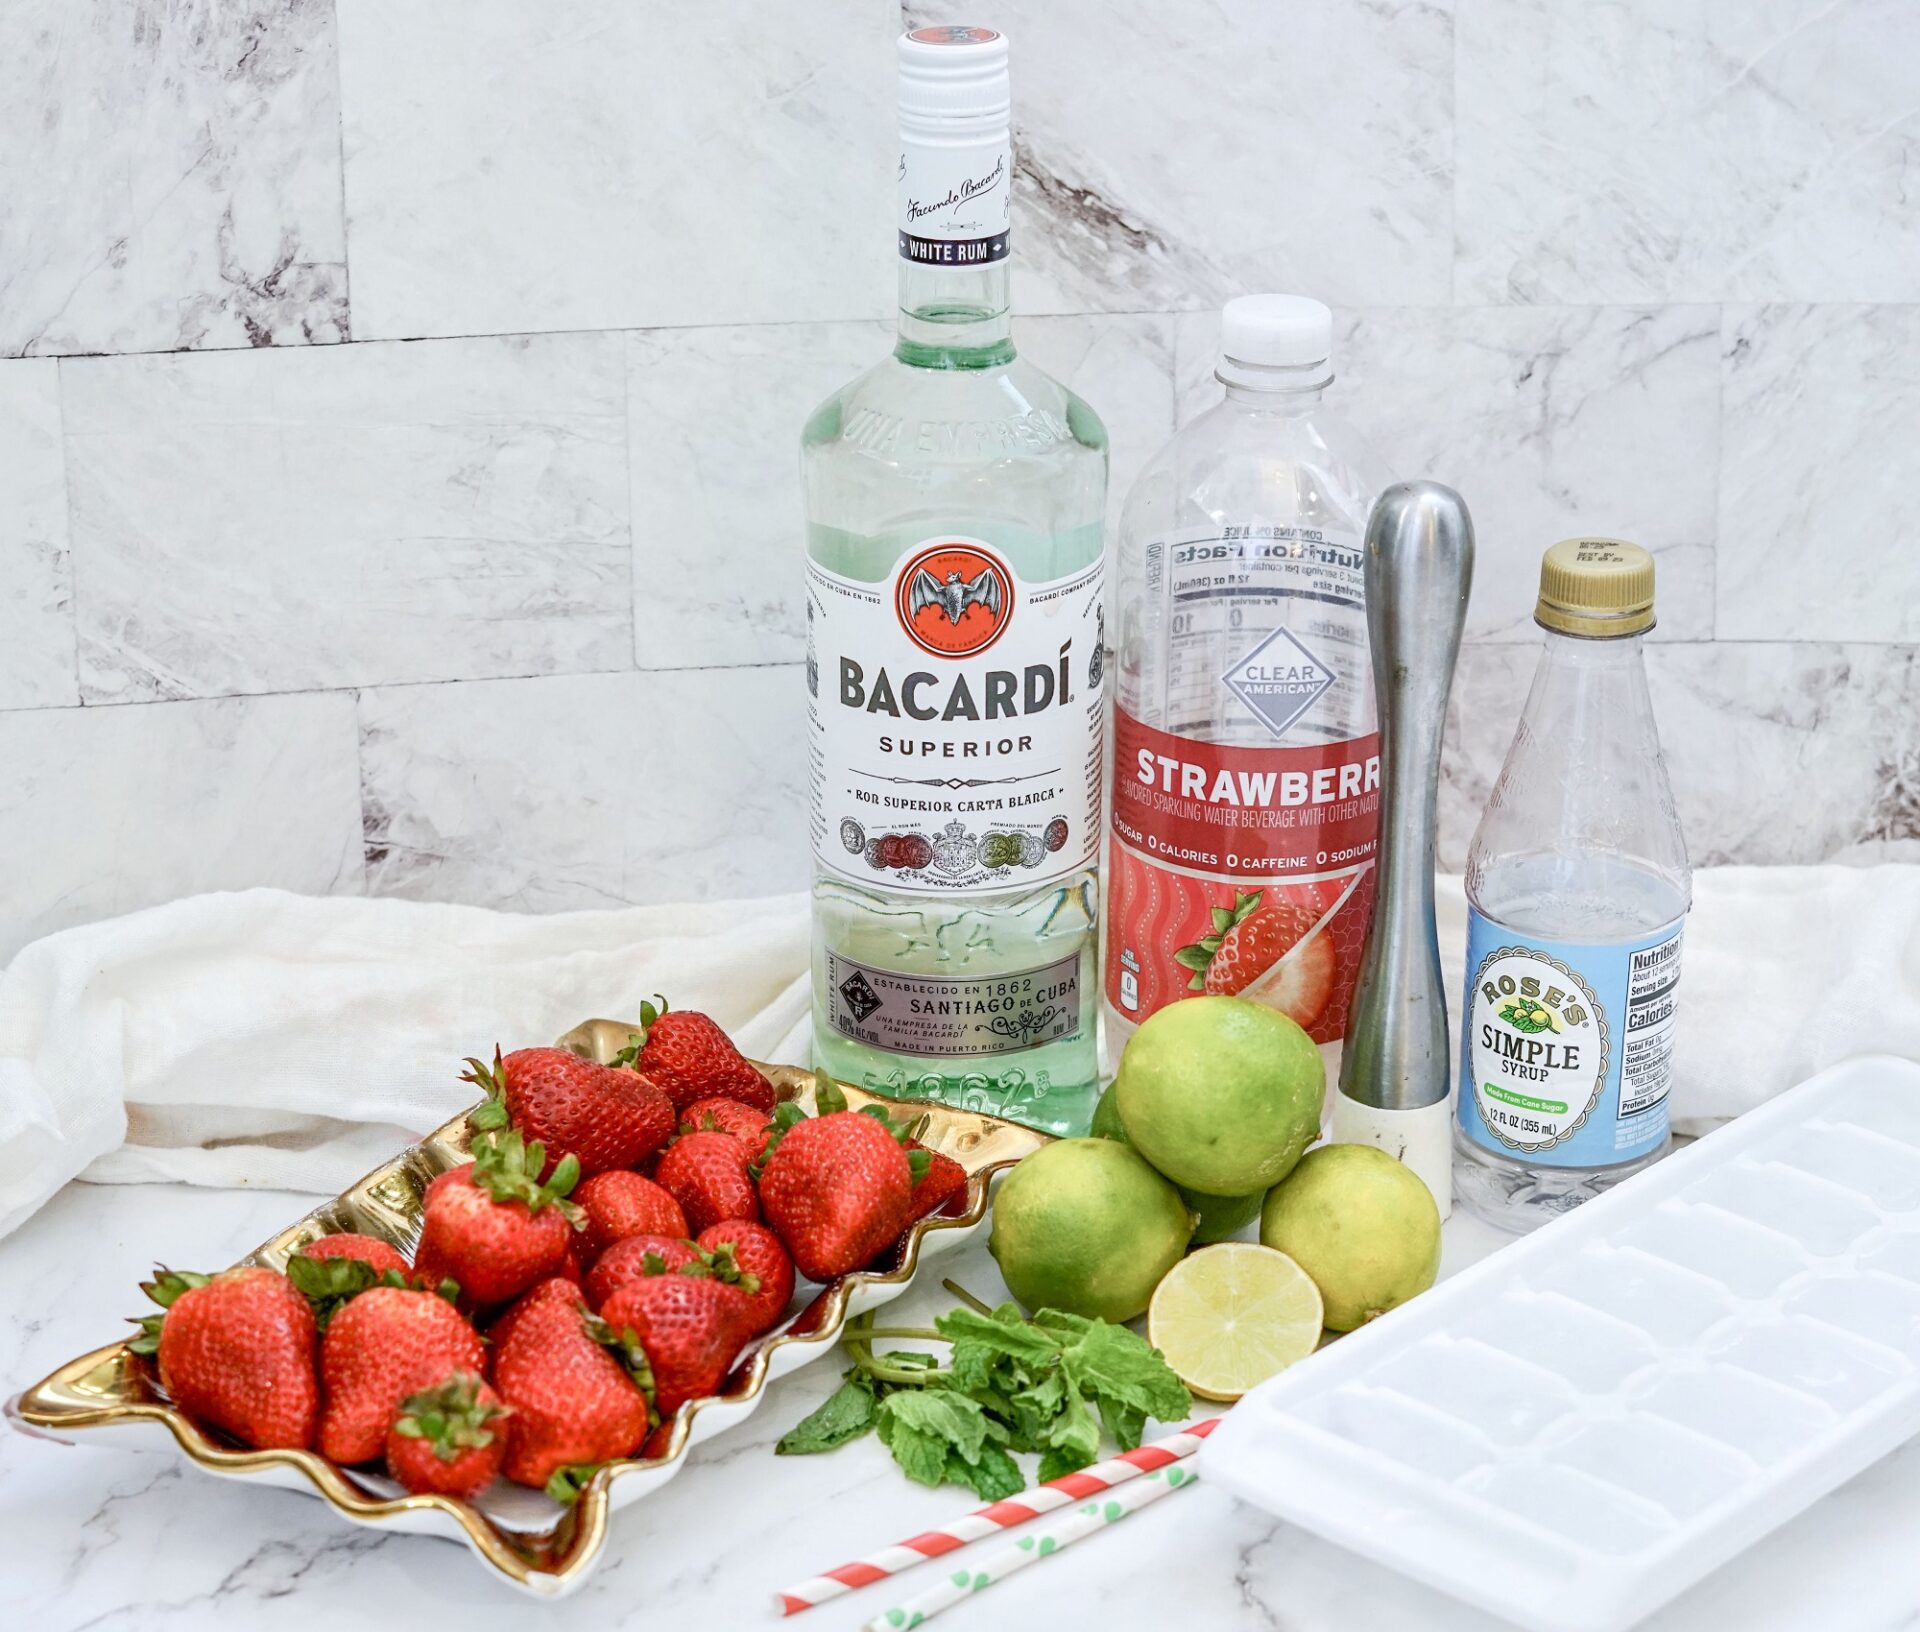 Ingredients for strawberry mojito on a counter.